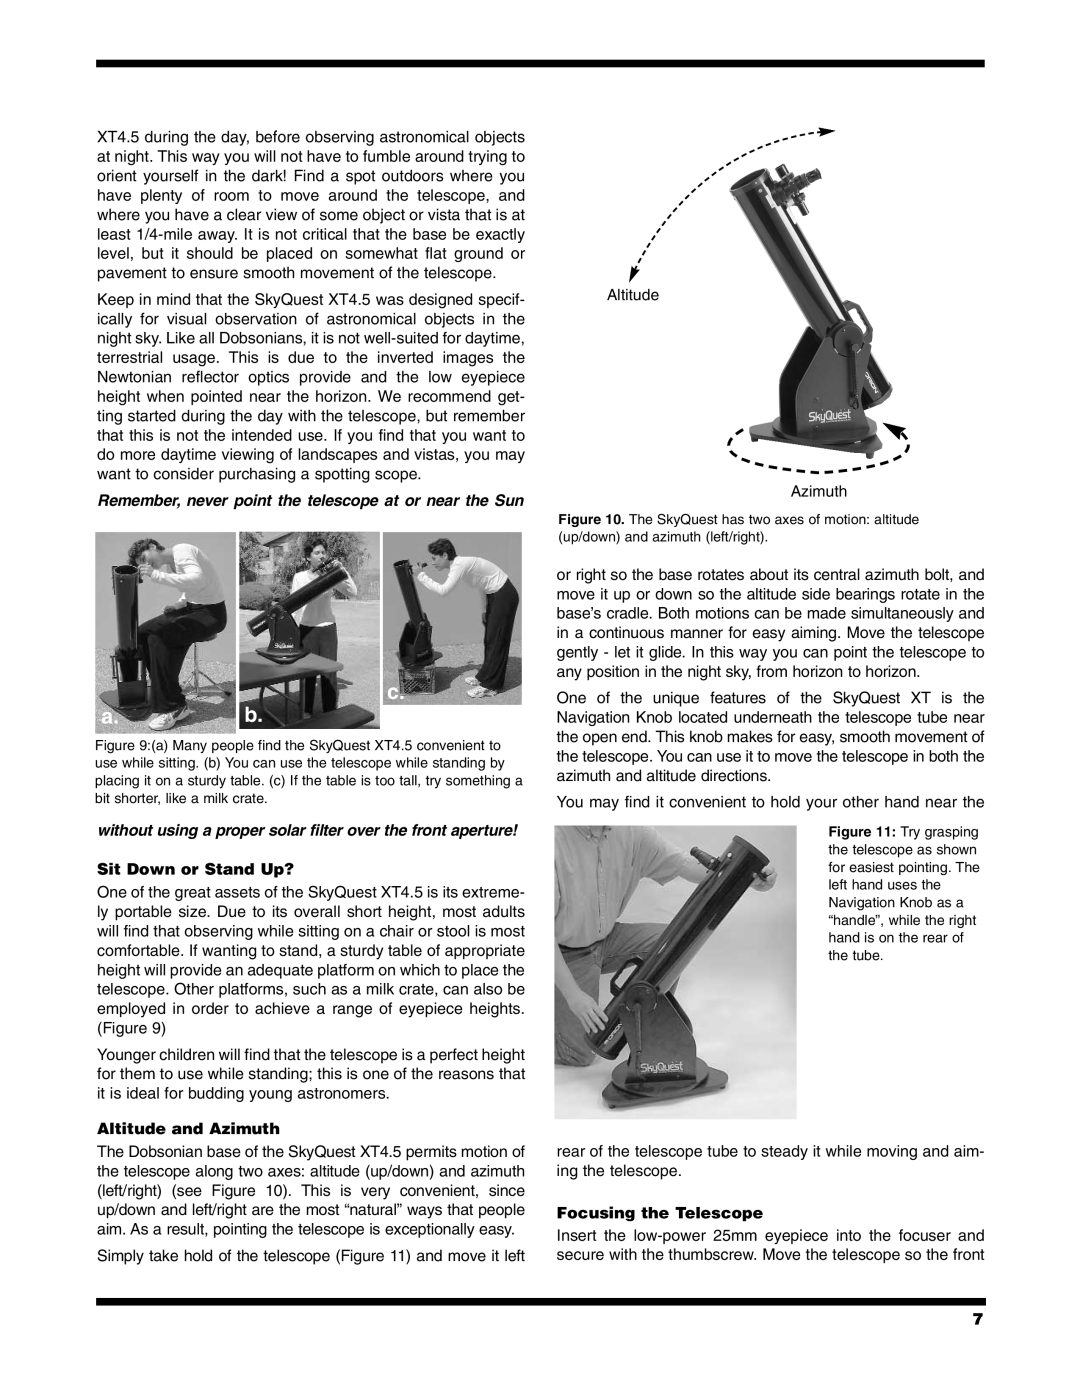 Orion XT4.5 instruction manual c a.b, Sit Down or Stand Up?, Altitude and Azimuth, Focusing the Telescope 